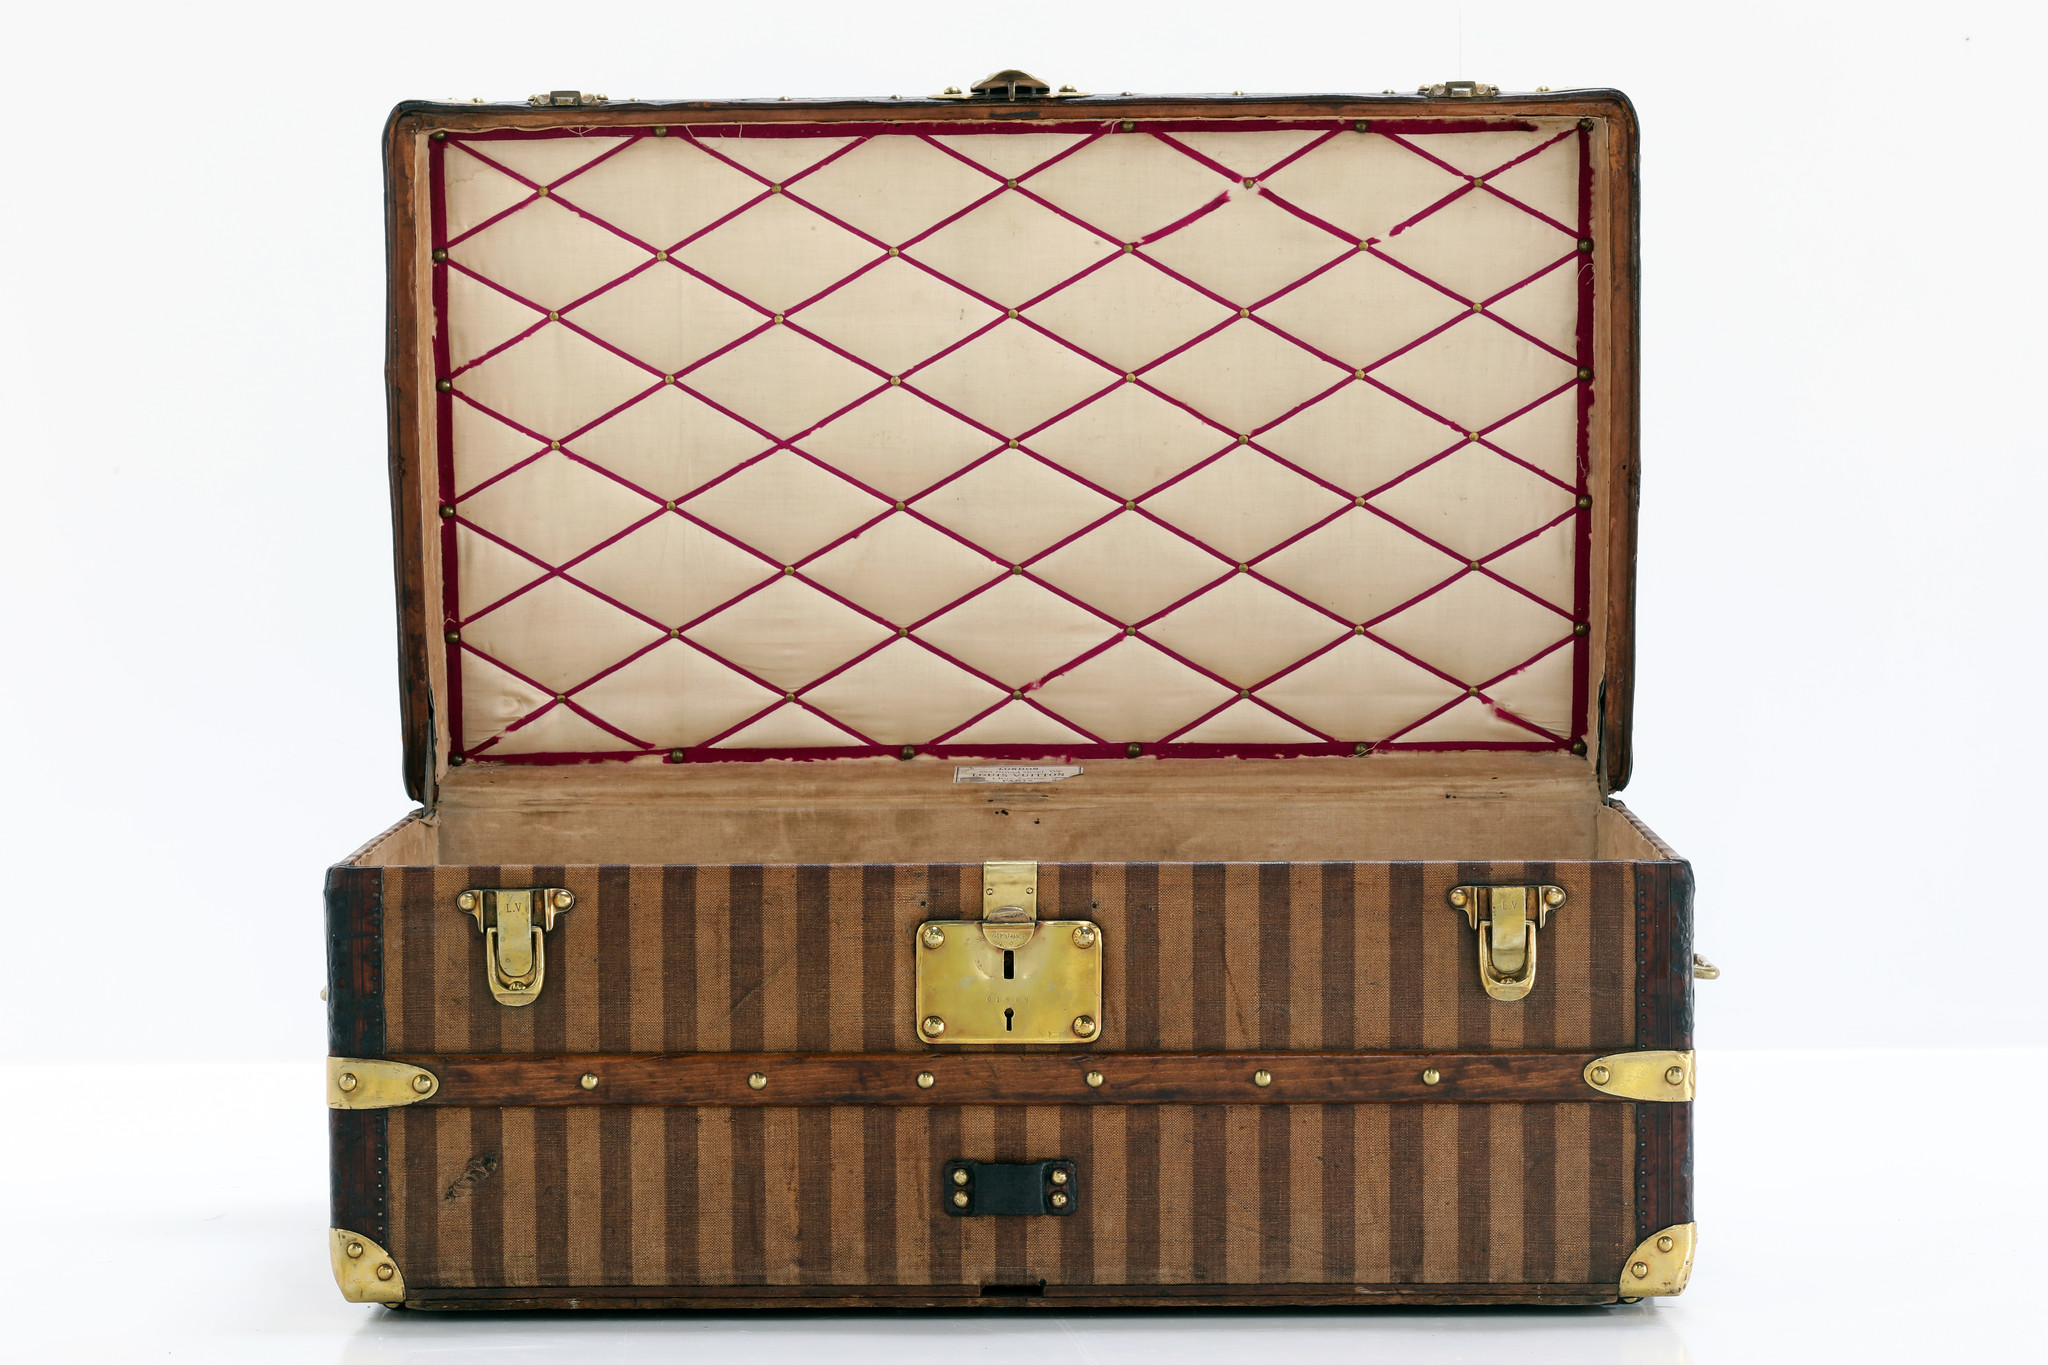 Antique Louis Vuitton suitcase - THE HOUSE OF WAUW